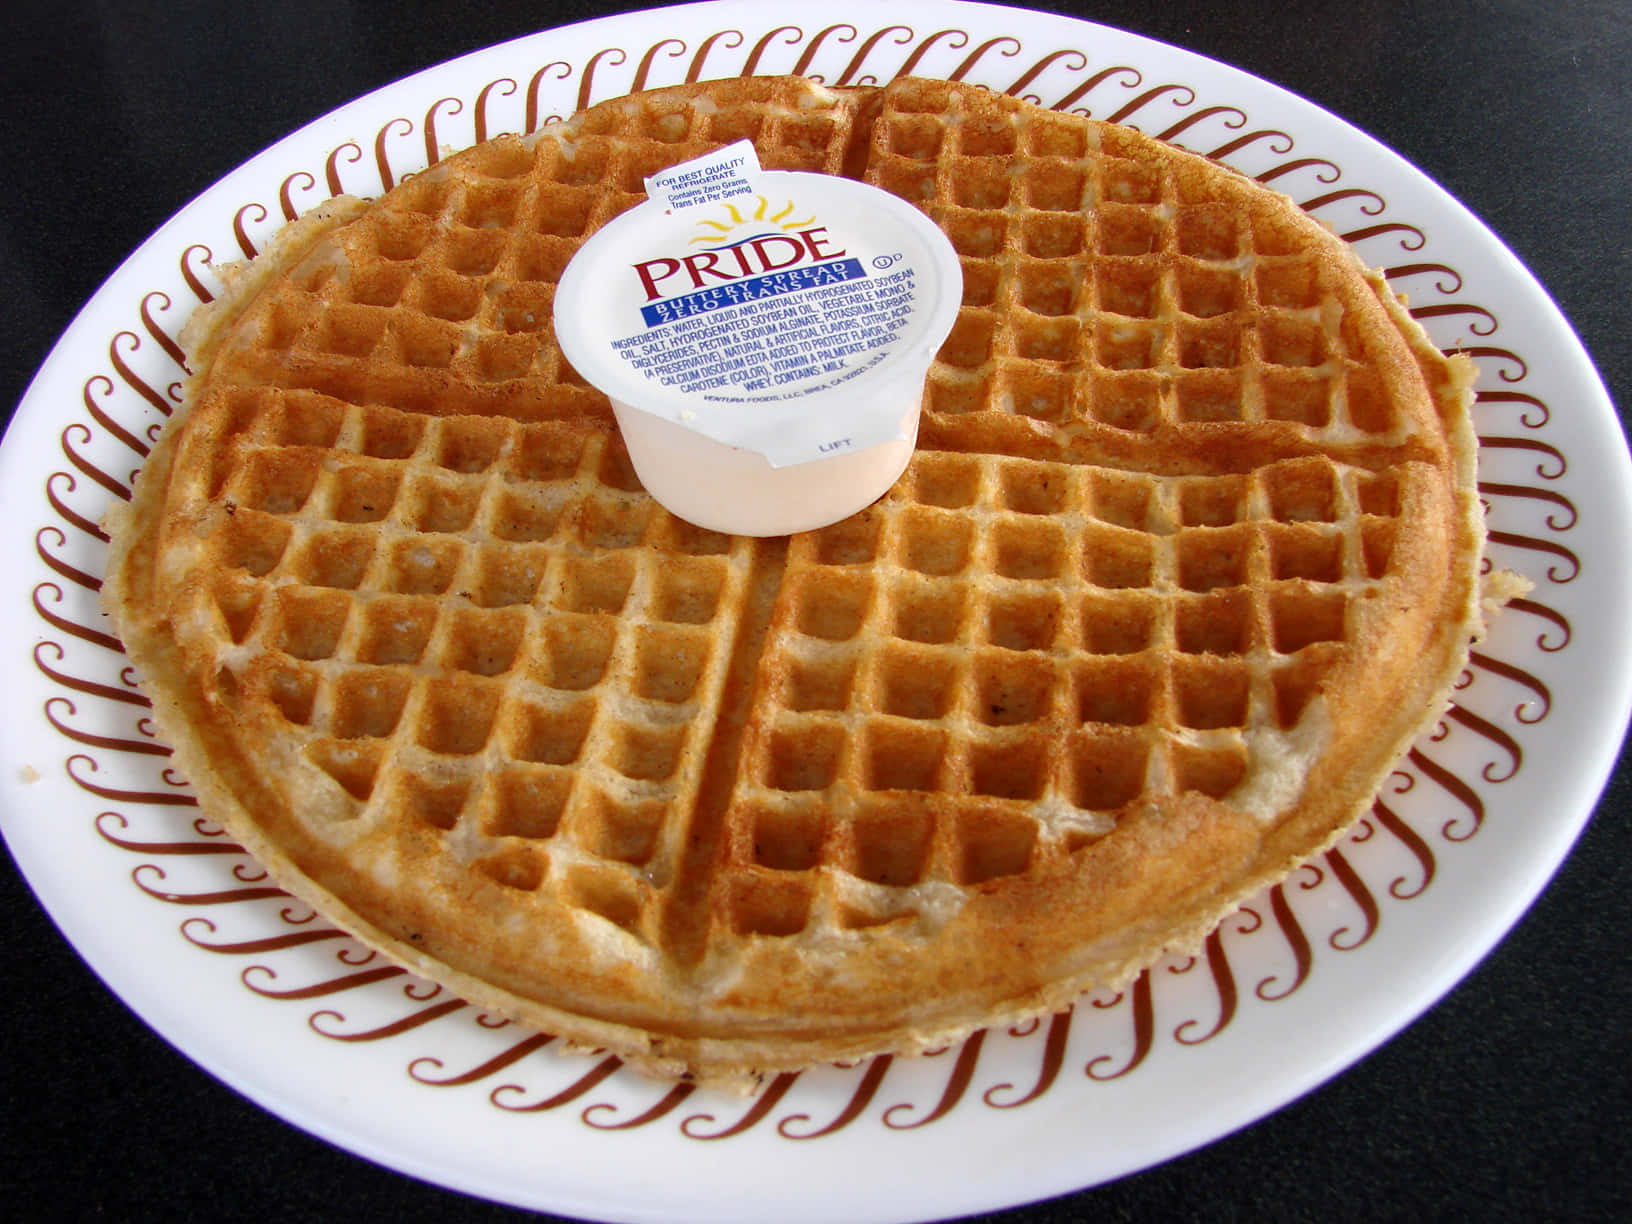 Delicious, golden-brown waffle with butter and syrup